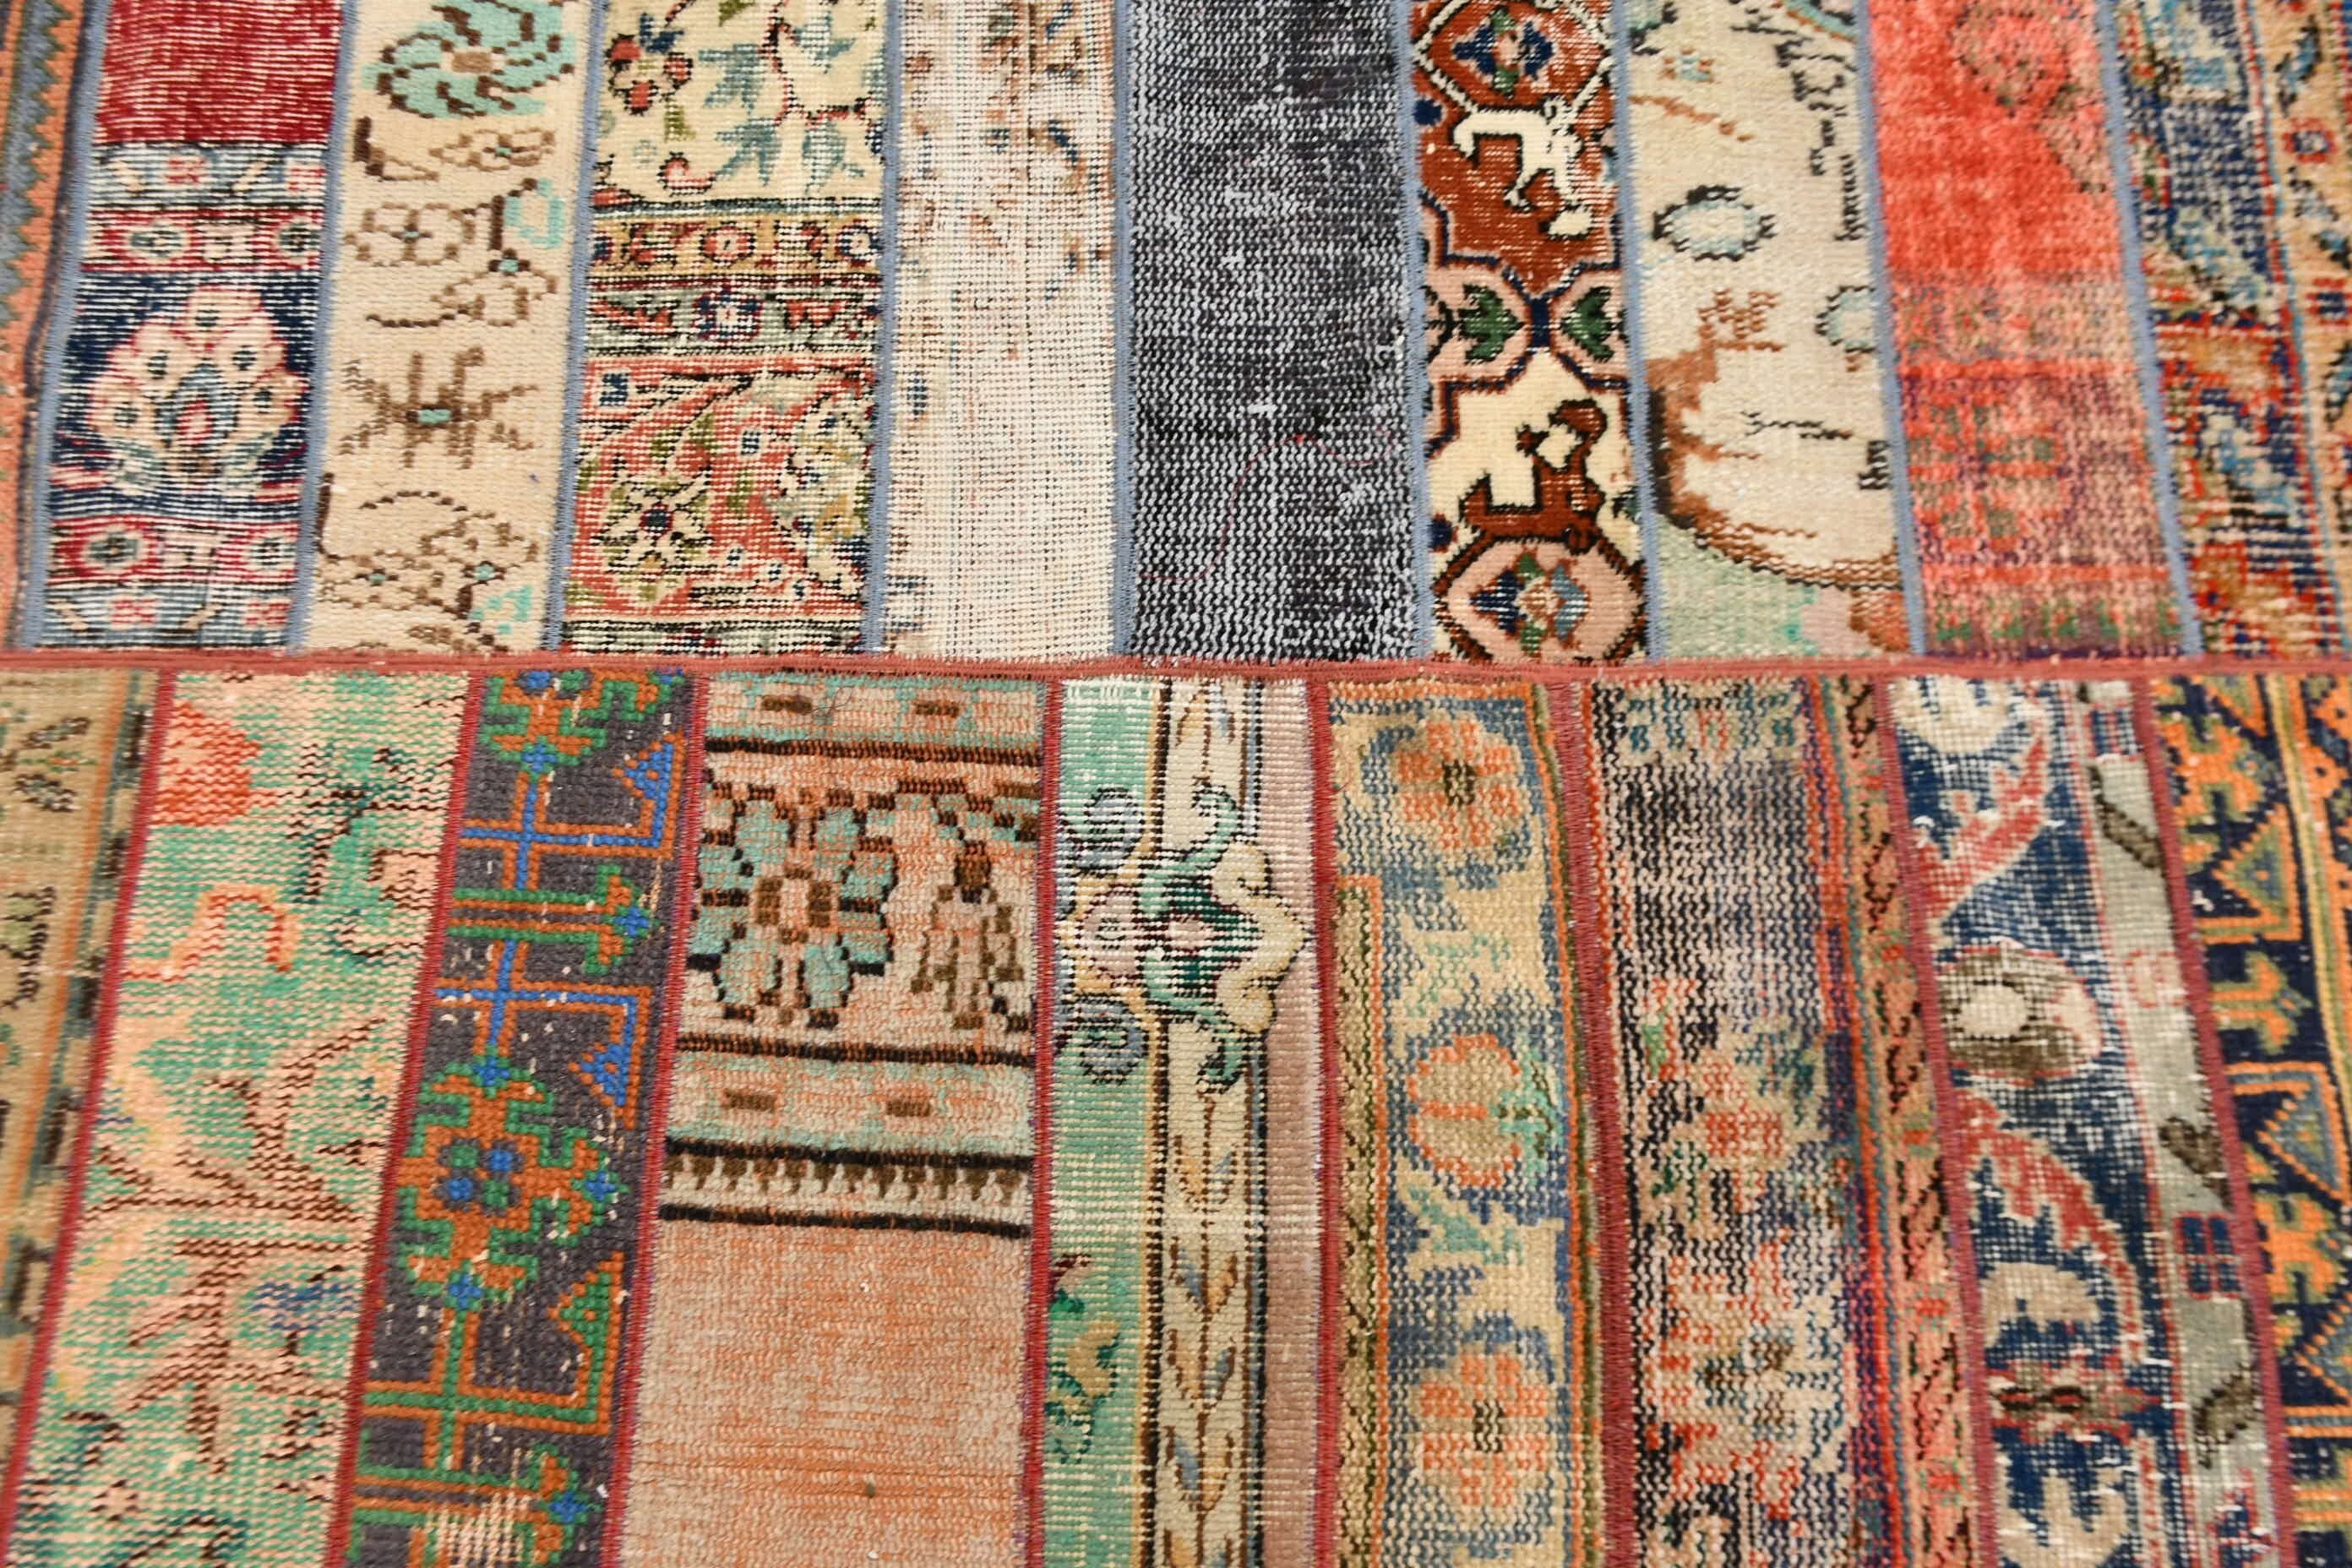 3.7x5.1 ft Accent Rug, Cool Rugs, Antique Rugs, Blue Moroccan Rug, Rugs for Kitchen, Bedroom Rug, Turkish Rugs, Vintage Rug, Kitchen Rug